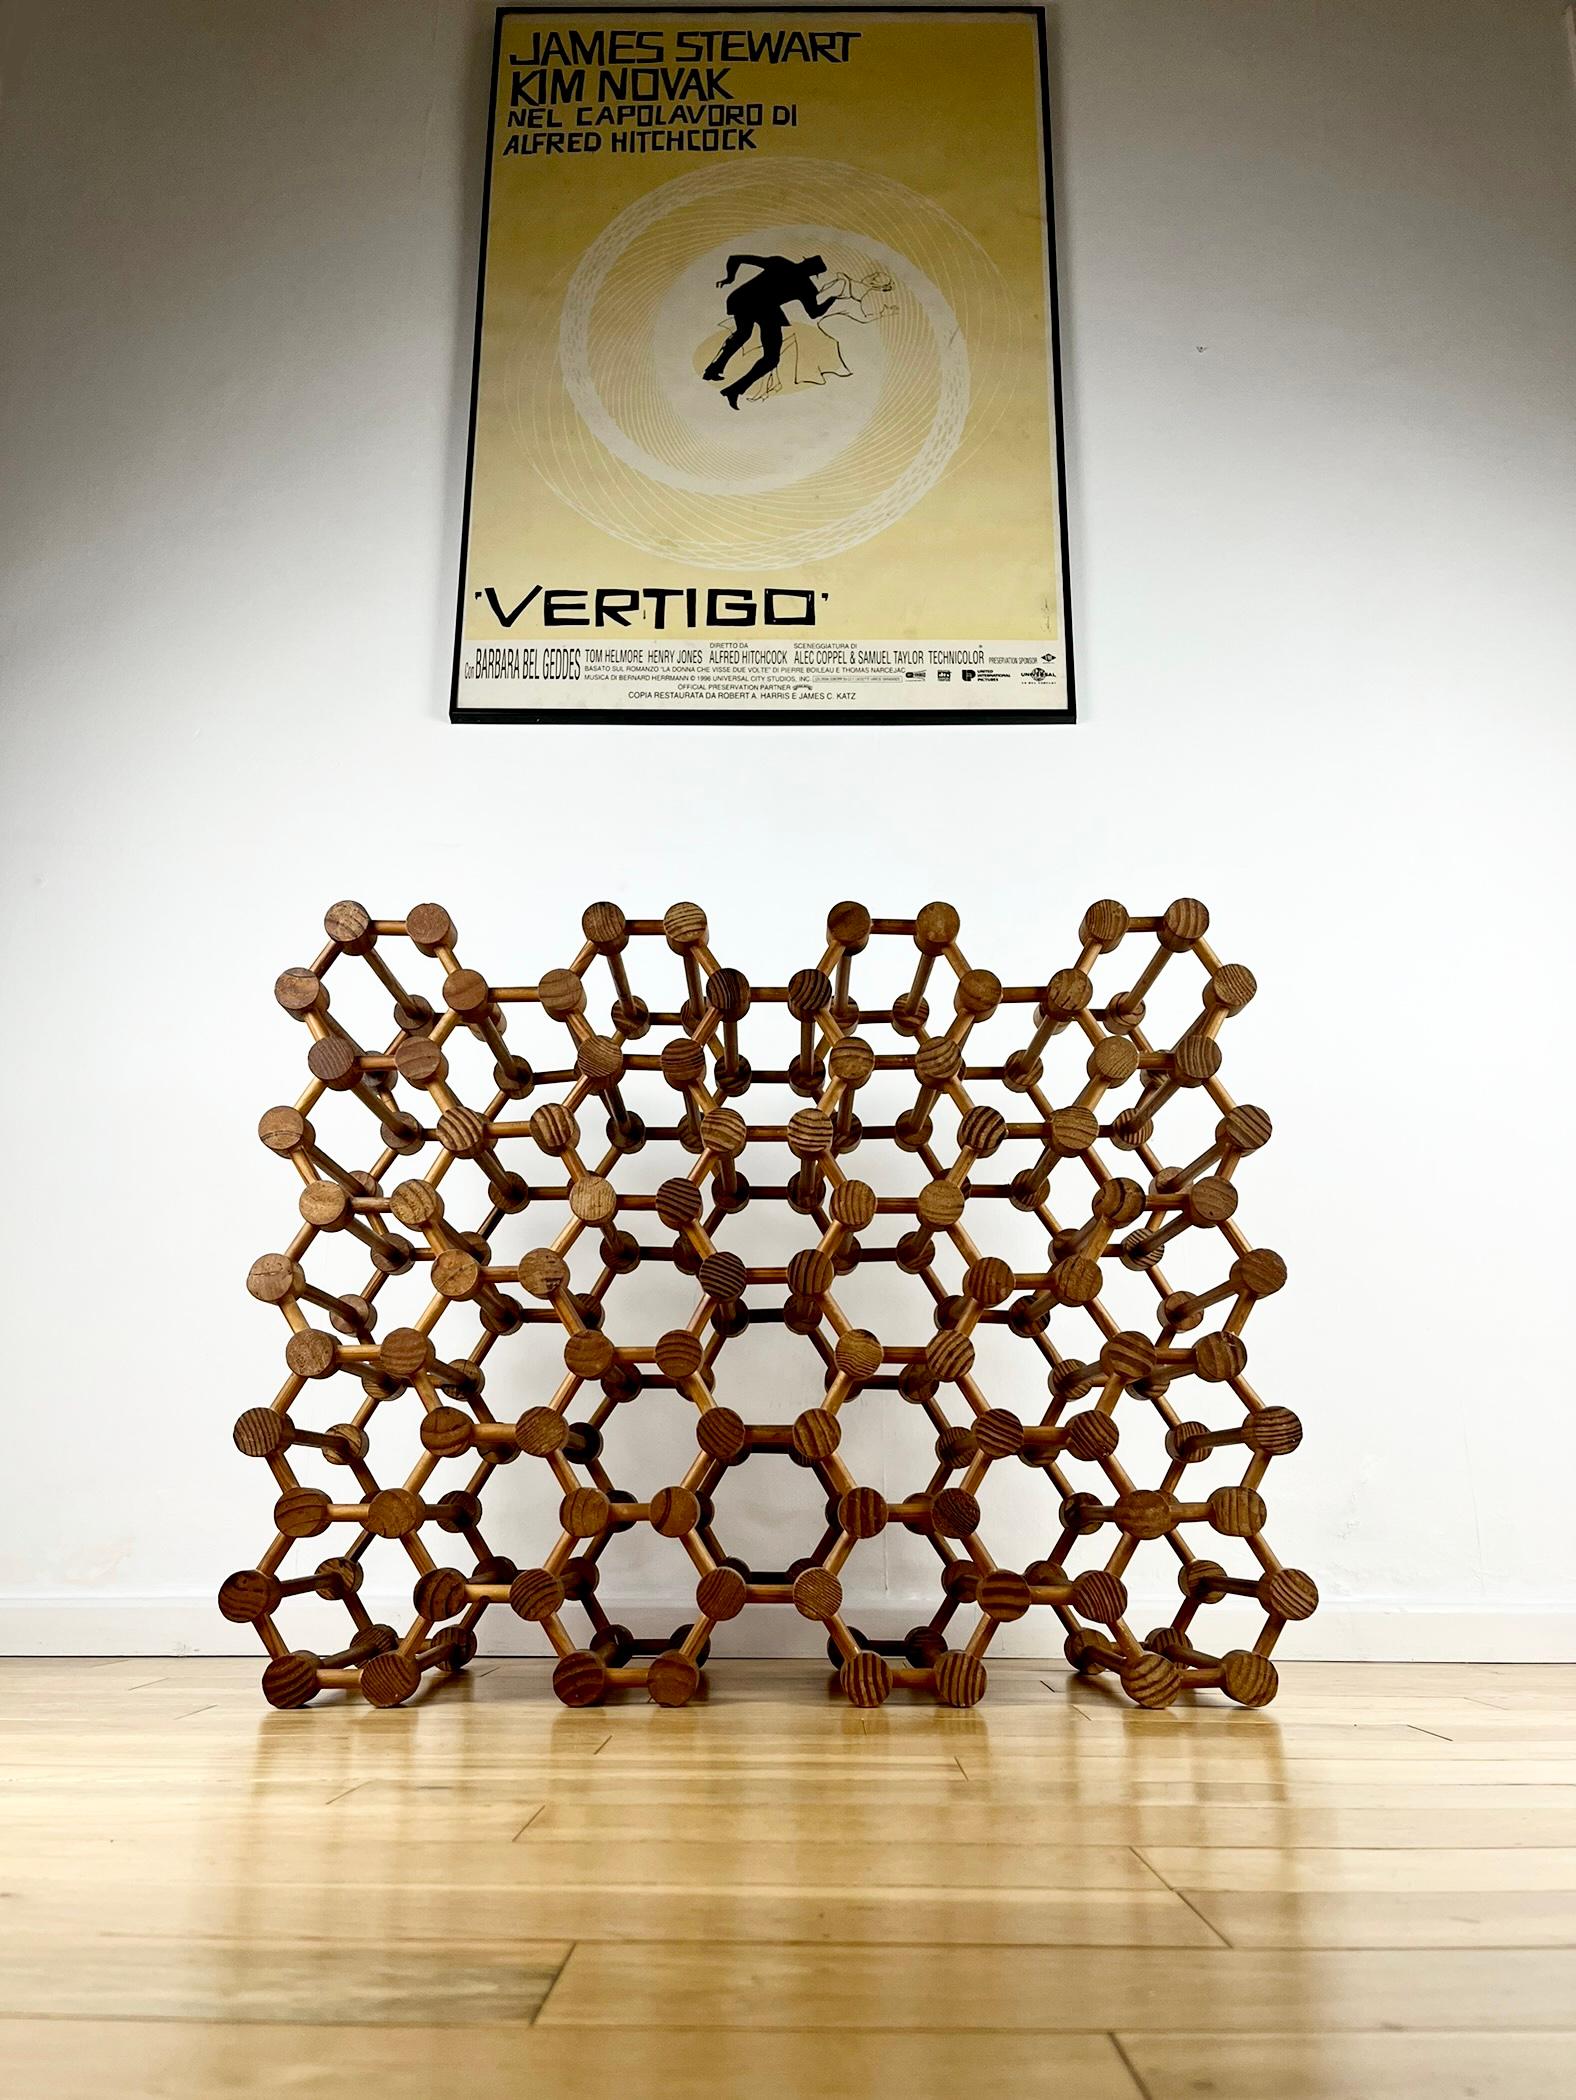 This awesome geometric design dates from the 1960s and can hold up 36 bottles!
It’s reminiscent of the Richard Nissen designed Danish wine racks from the same era, although those have square holes… this atomic, honeycomb version is a particularly